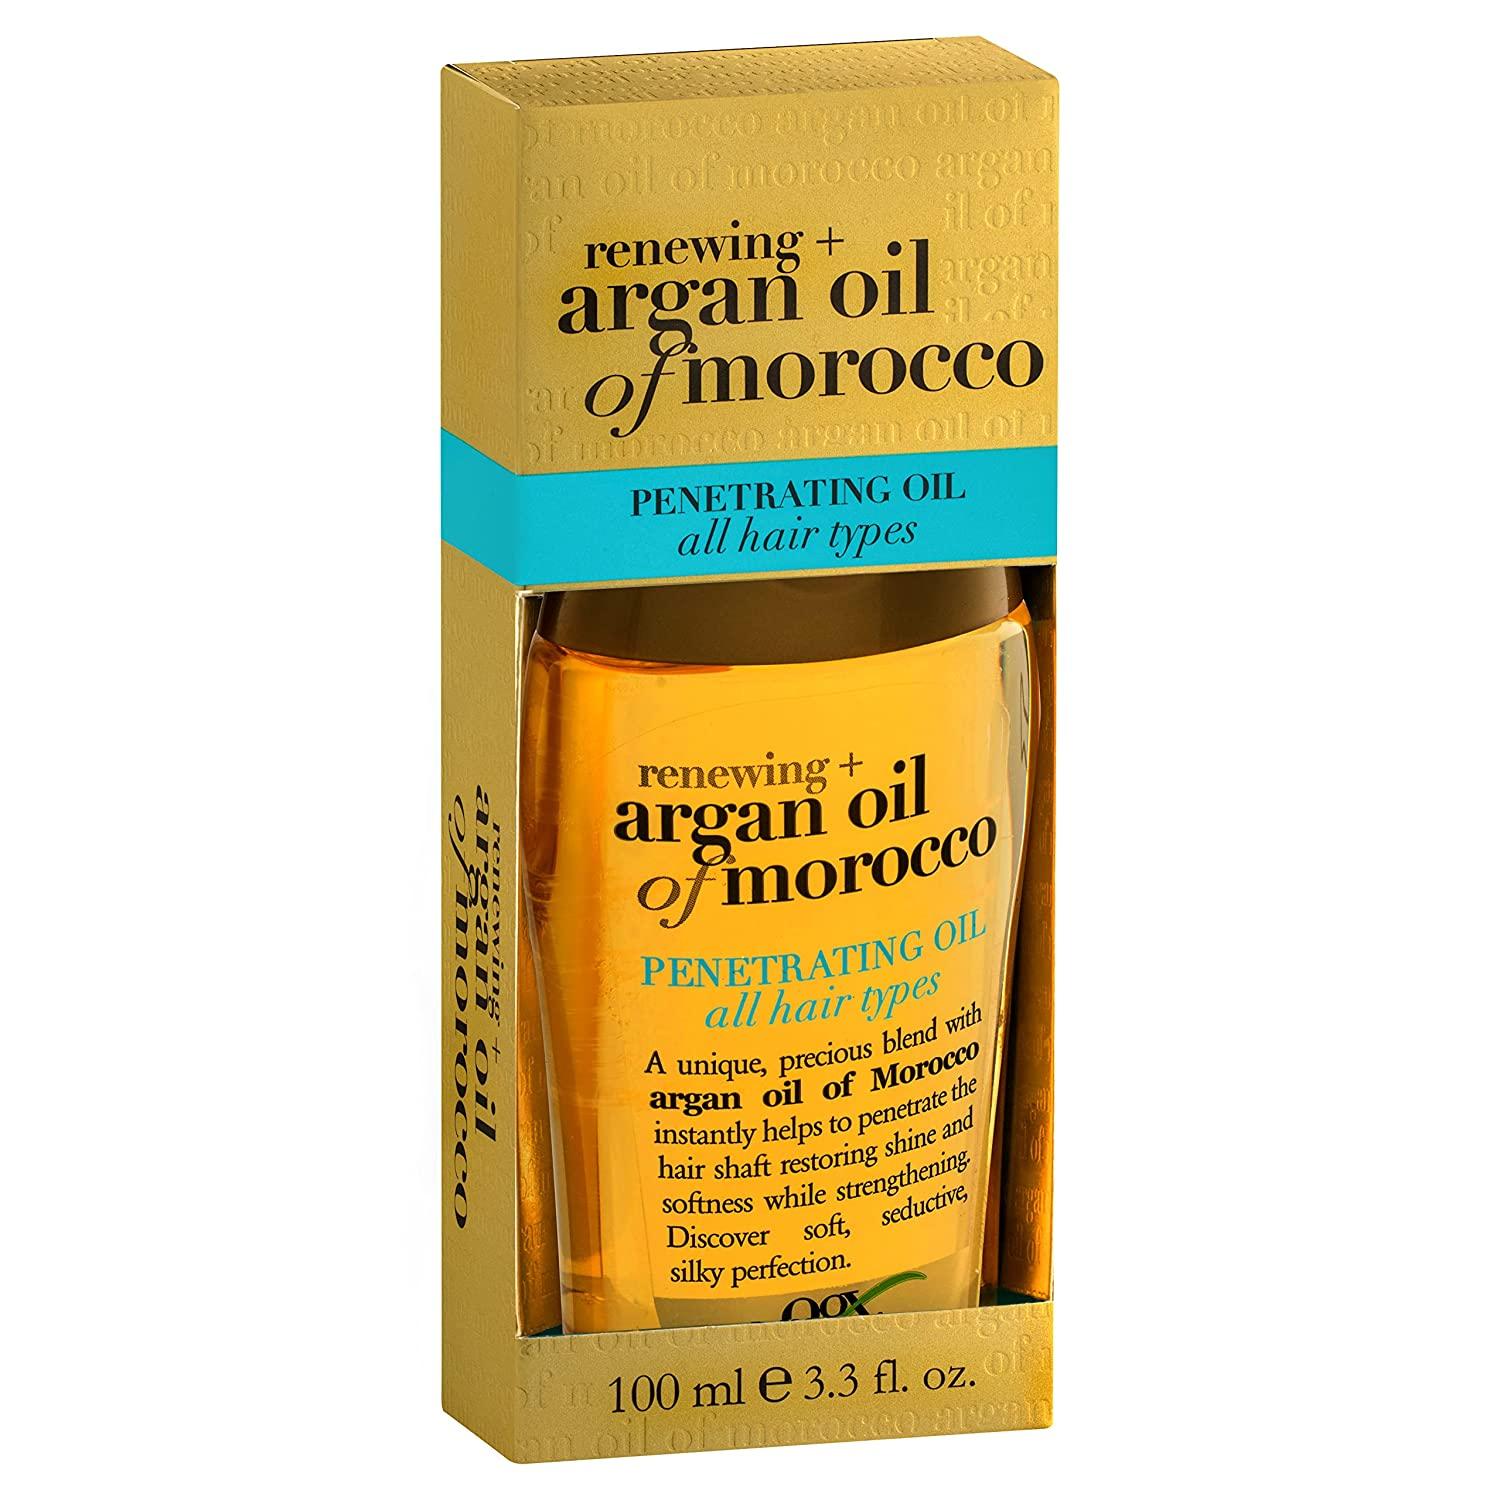 OGX Renewing and Argan Oil of Morocco Hair Oil Treatment for $4.32 Shipped